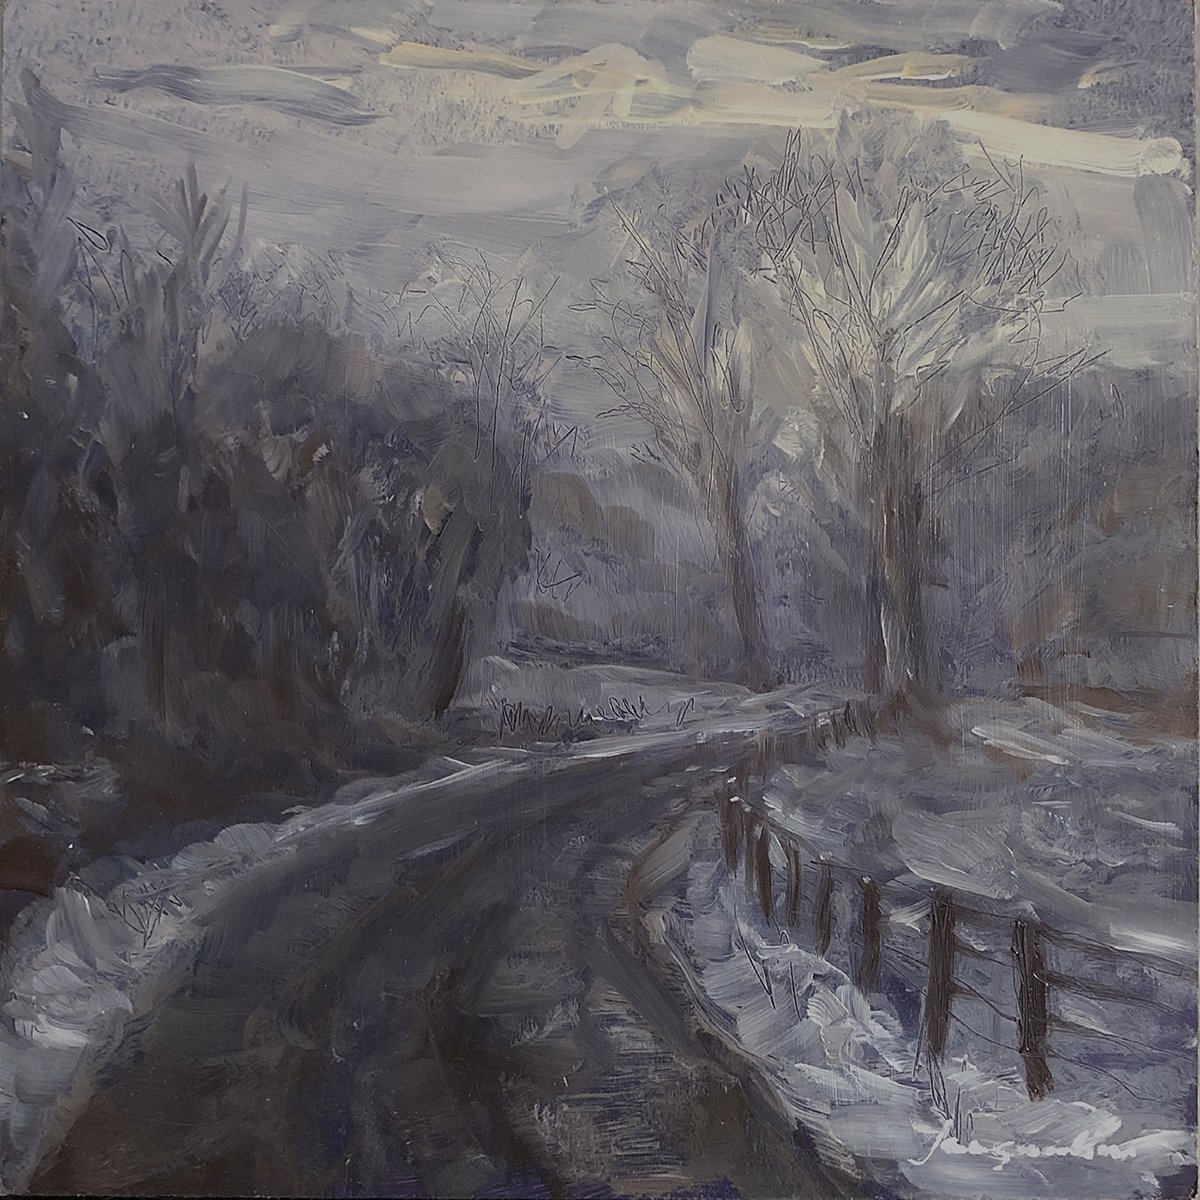 Road in foggy winterland by Jacqualine Zonneveld